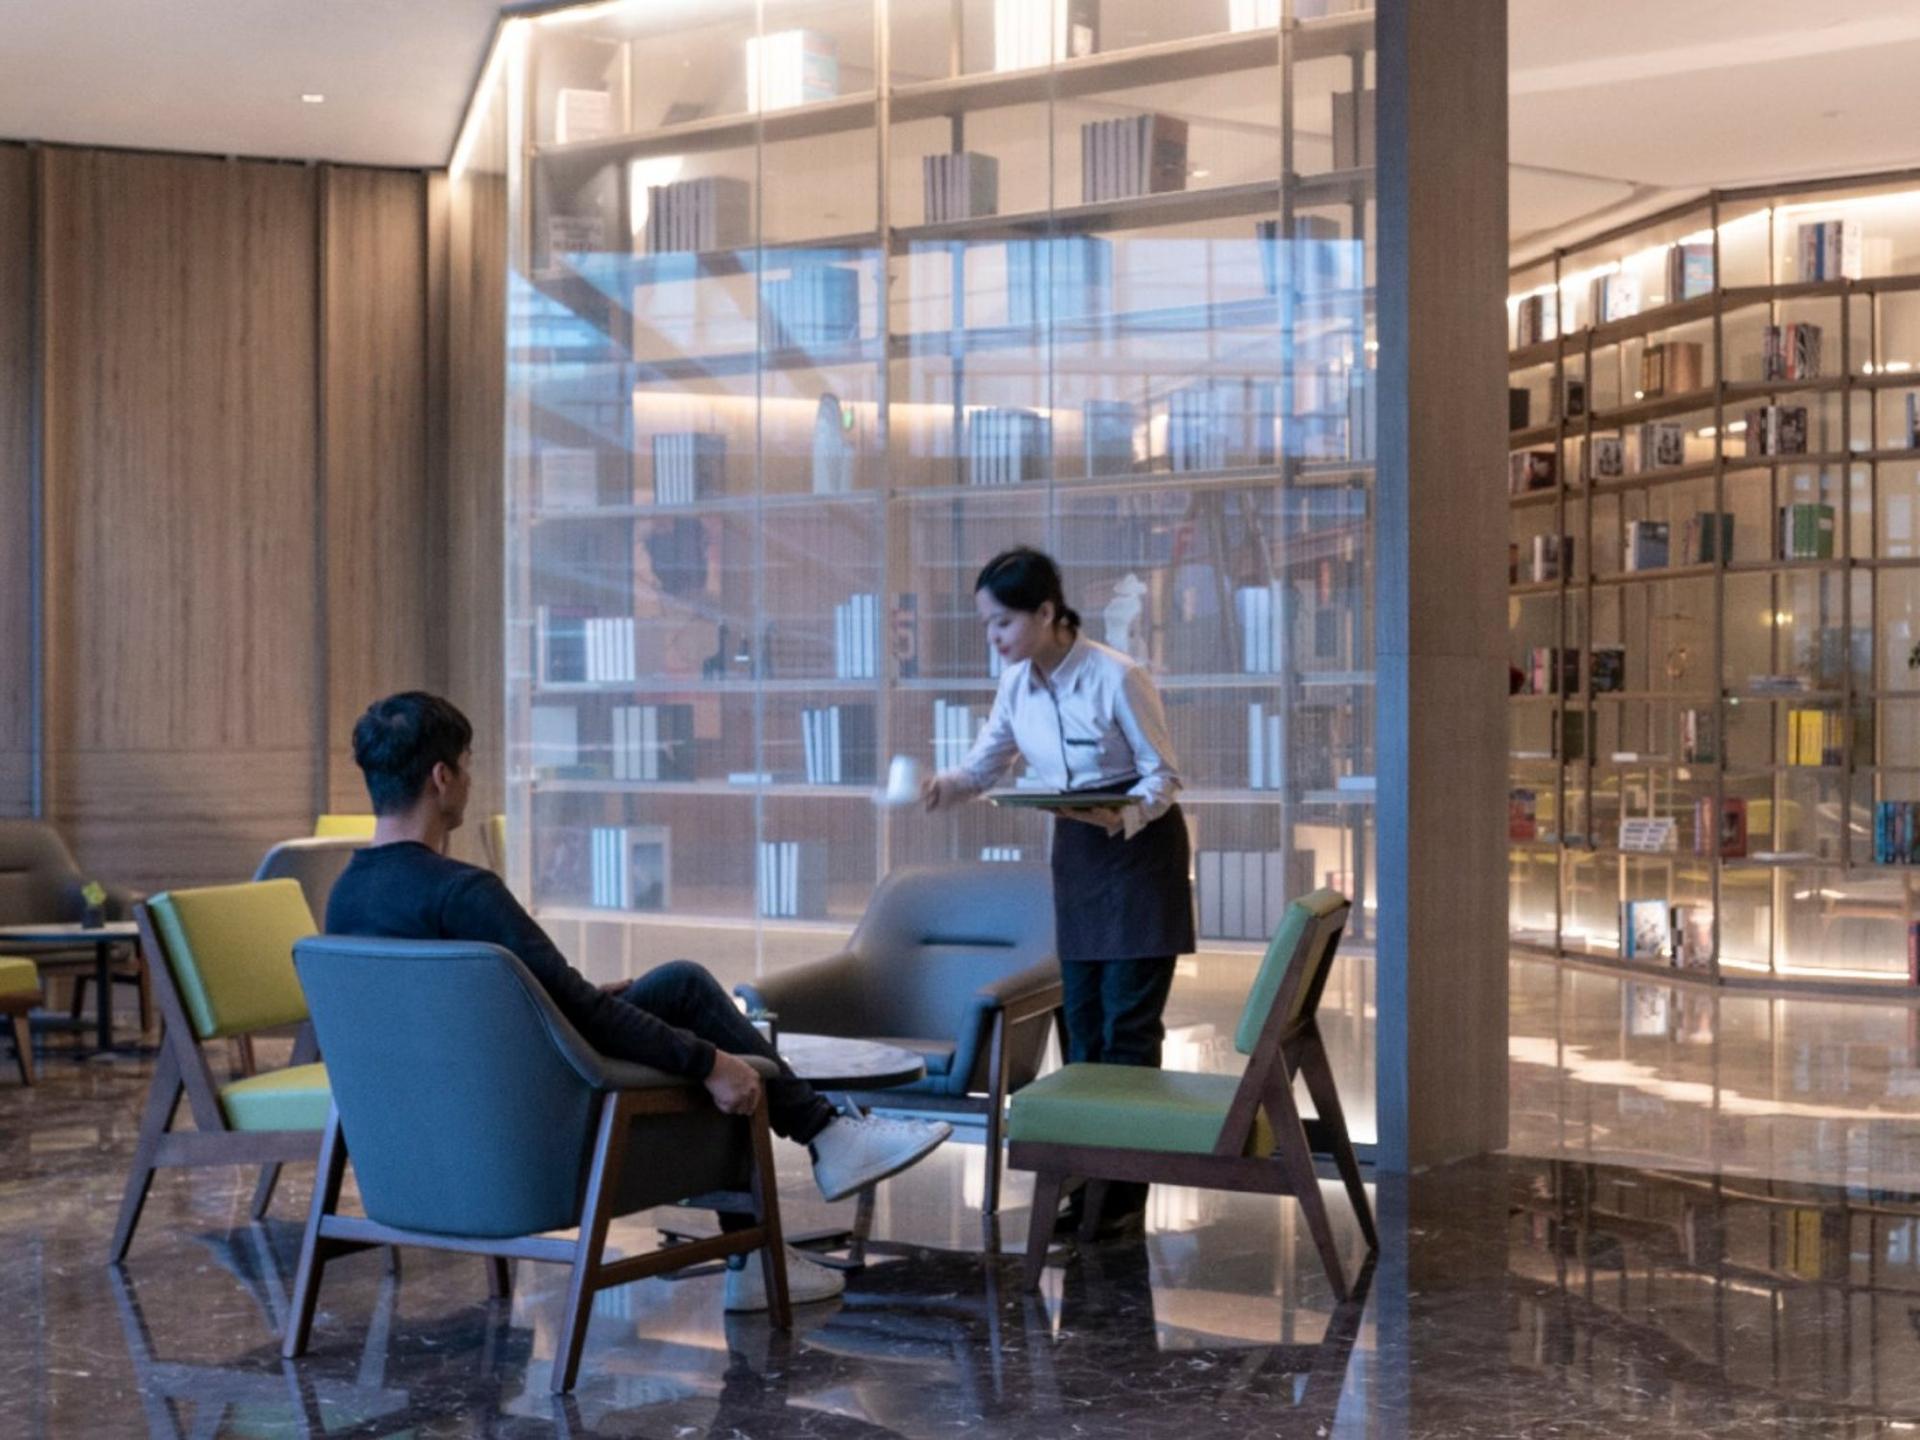 Library Lounge by Aerotel Beijing image 2 of 4